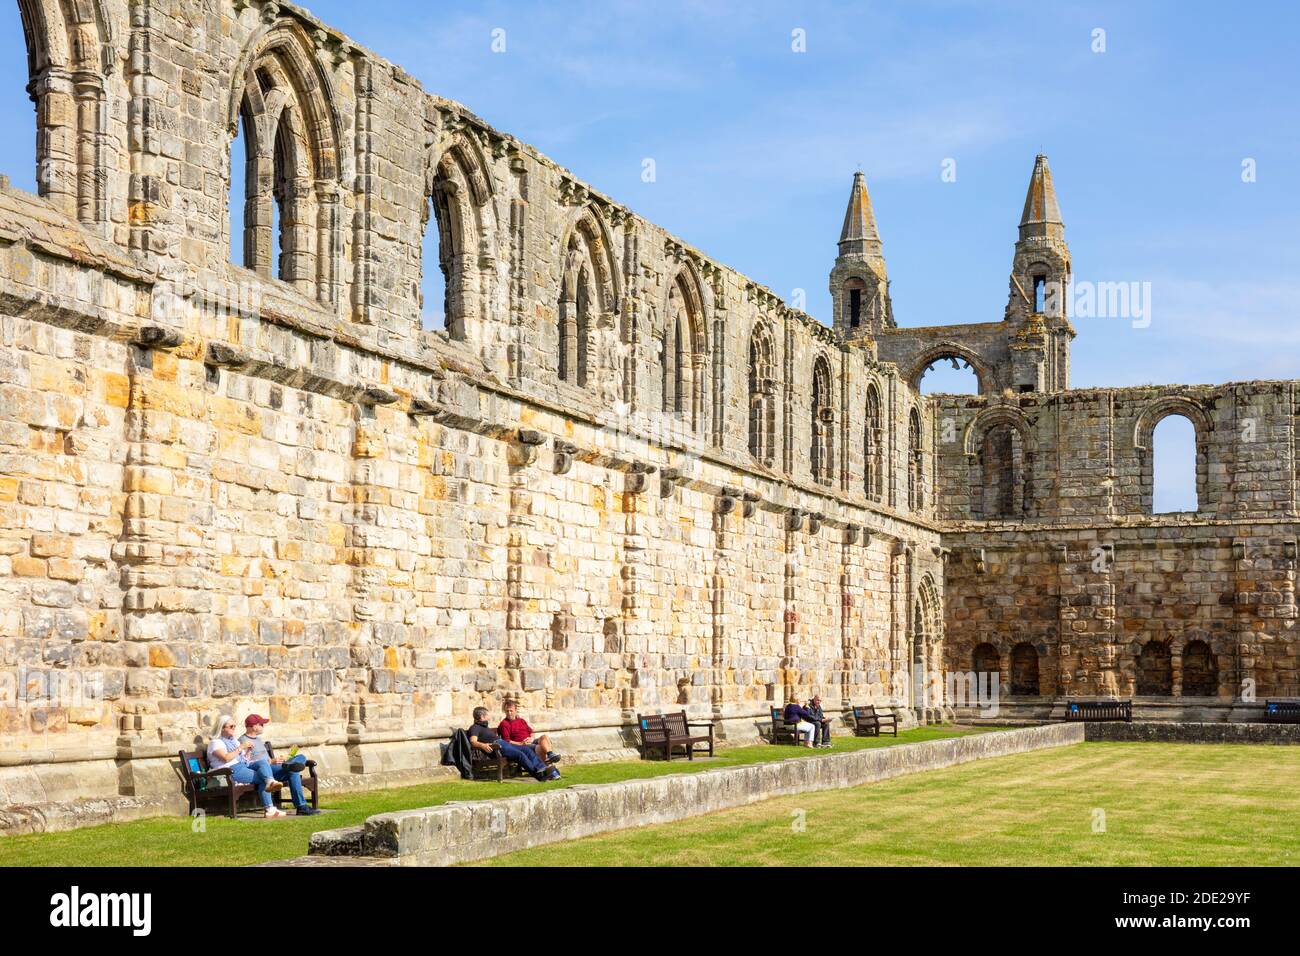 St Andrews Scotland Ruins of St Andrews Cathedral Royal Burgh of St Andrews Fife Scotland UK GB Europe Stock Photo